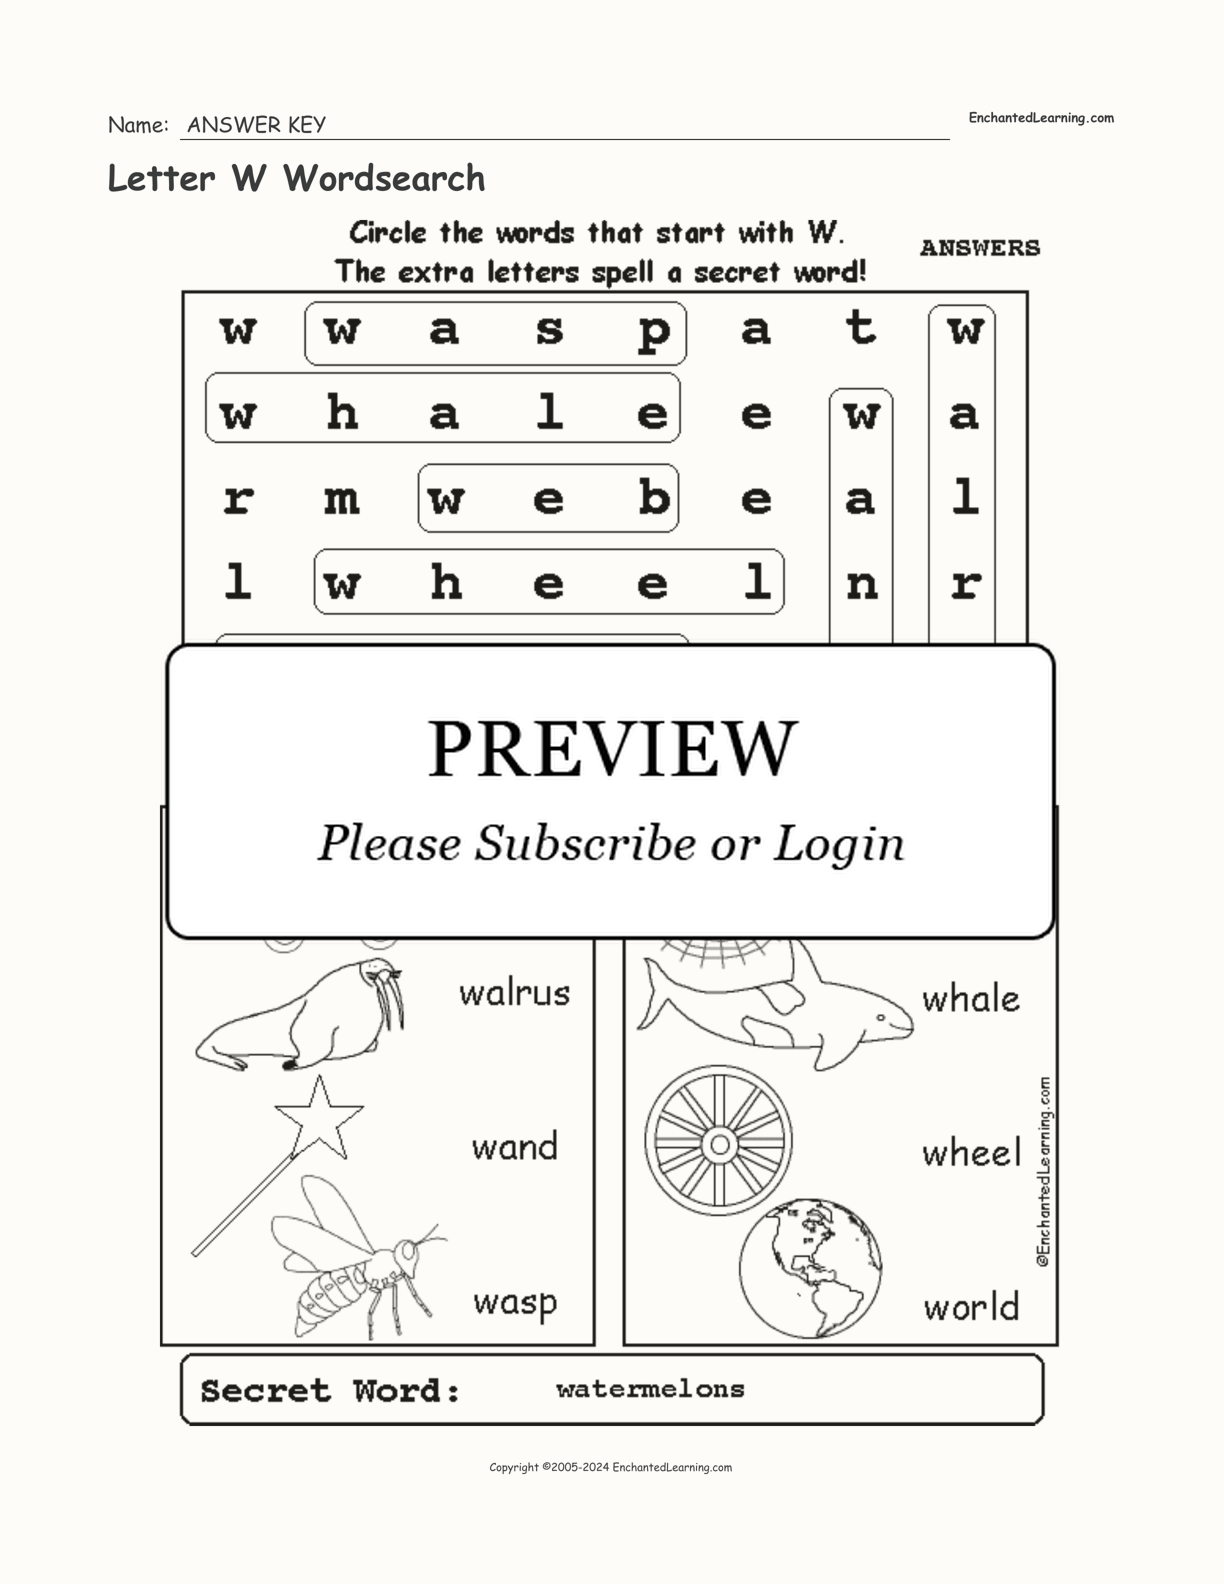 Letter W Wordsearch interactive worksheet page 2